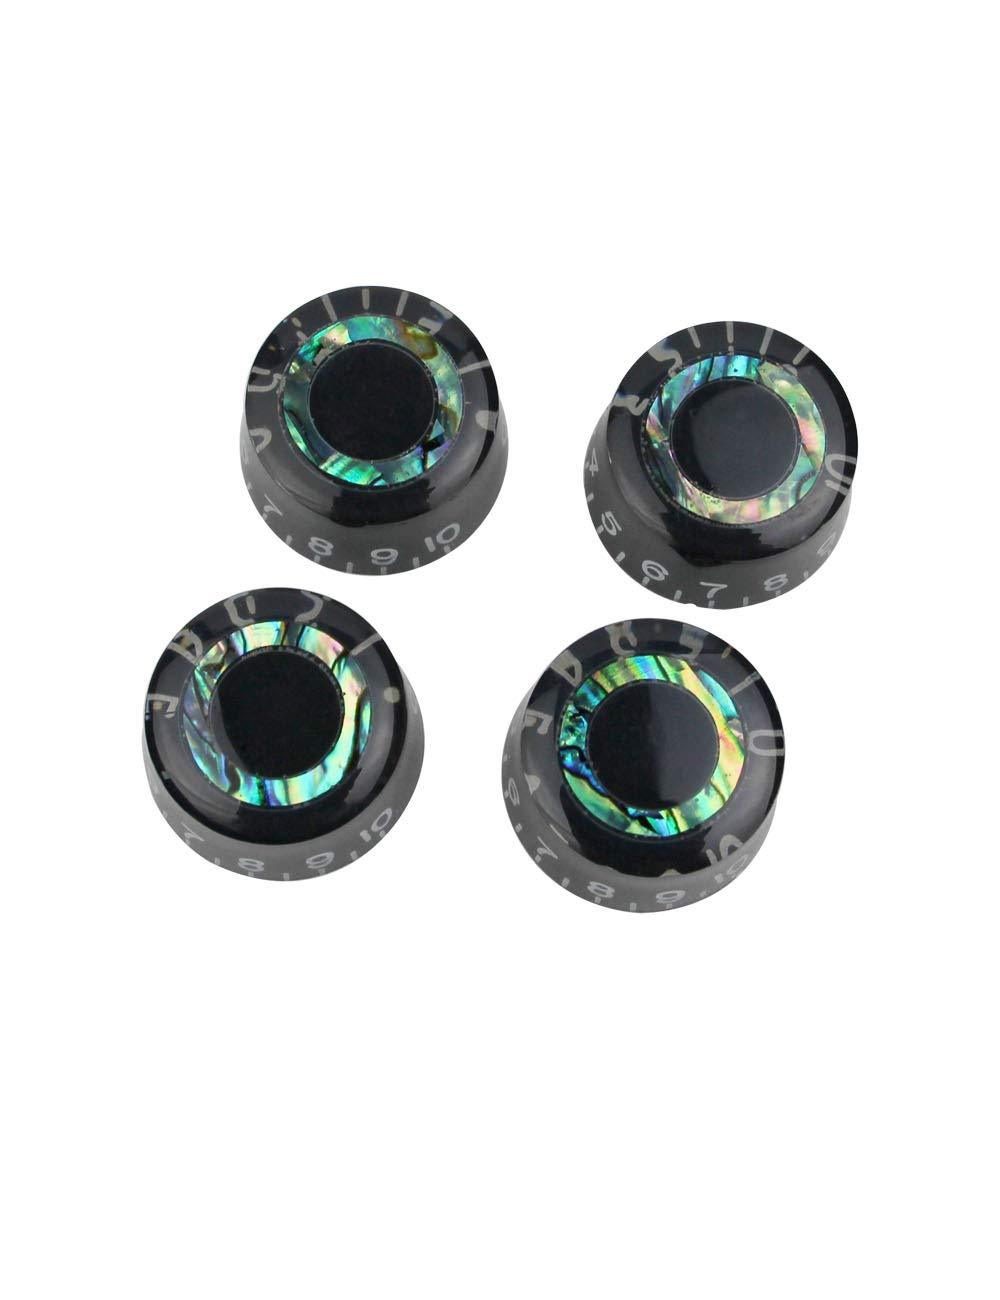 Guyker 4Pcs Guitar Control Knobs for 6mm(0.24”) Dia. Shaft Pots - Abalone Blue Green Speed Volume Tone Potentiometer Knob Compatible with Gibson Les Paul LP Style Electric Guitar Replacement Part